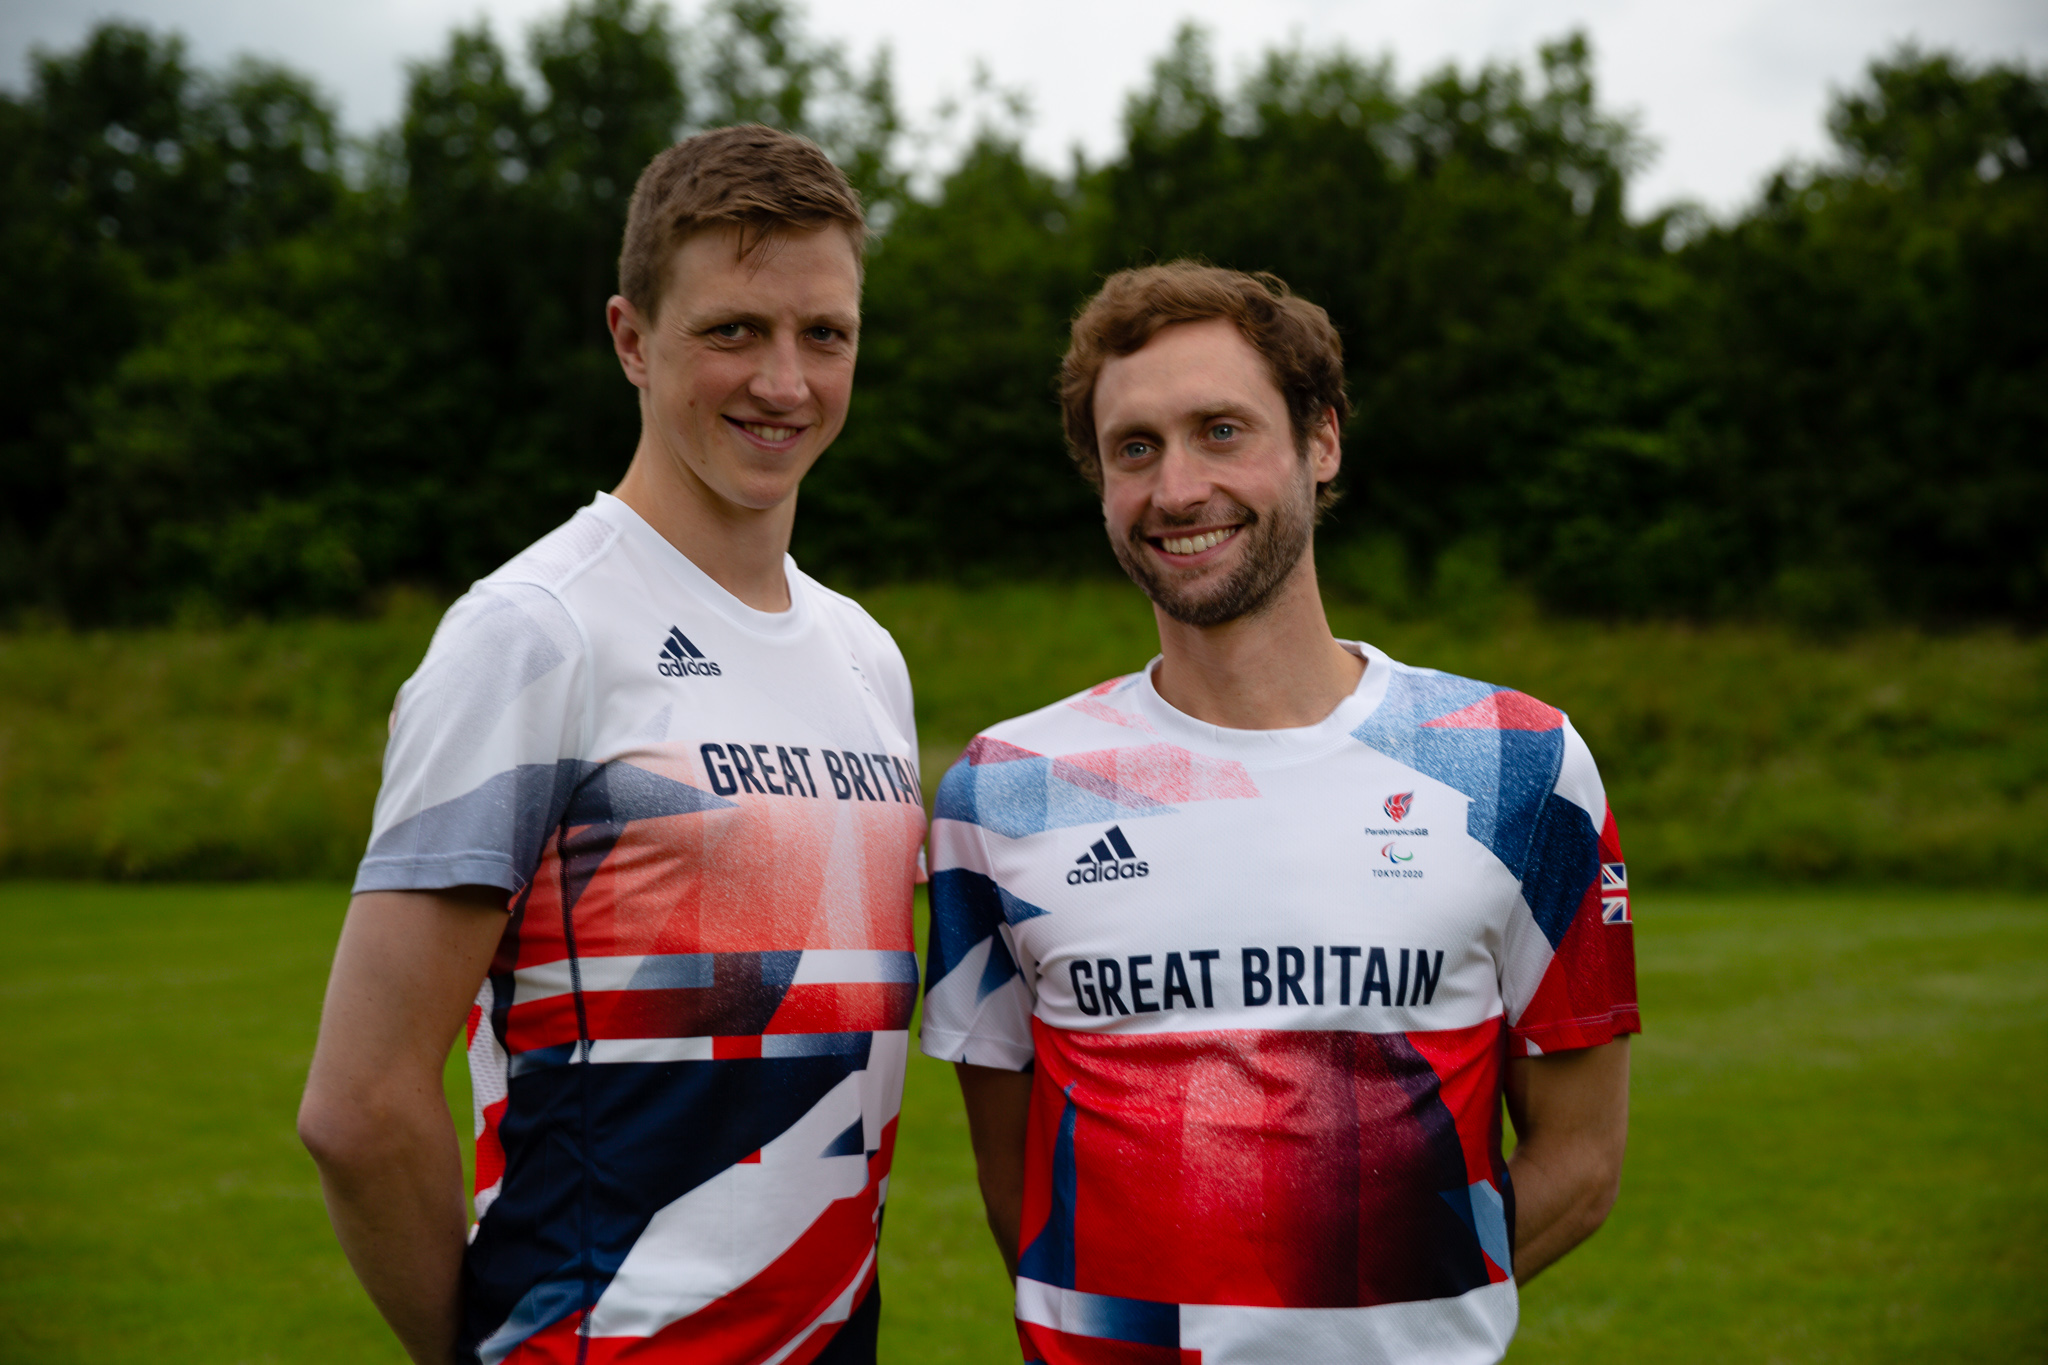 Luke and David in Team Great Britain colours.